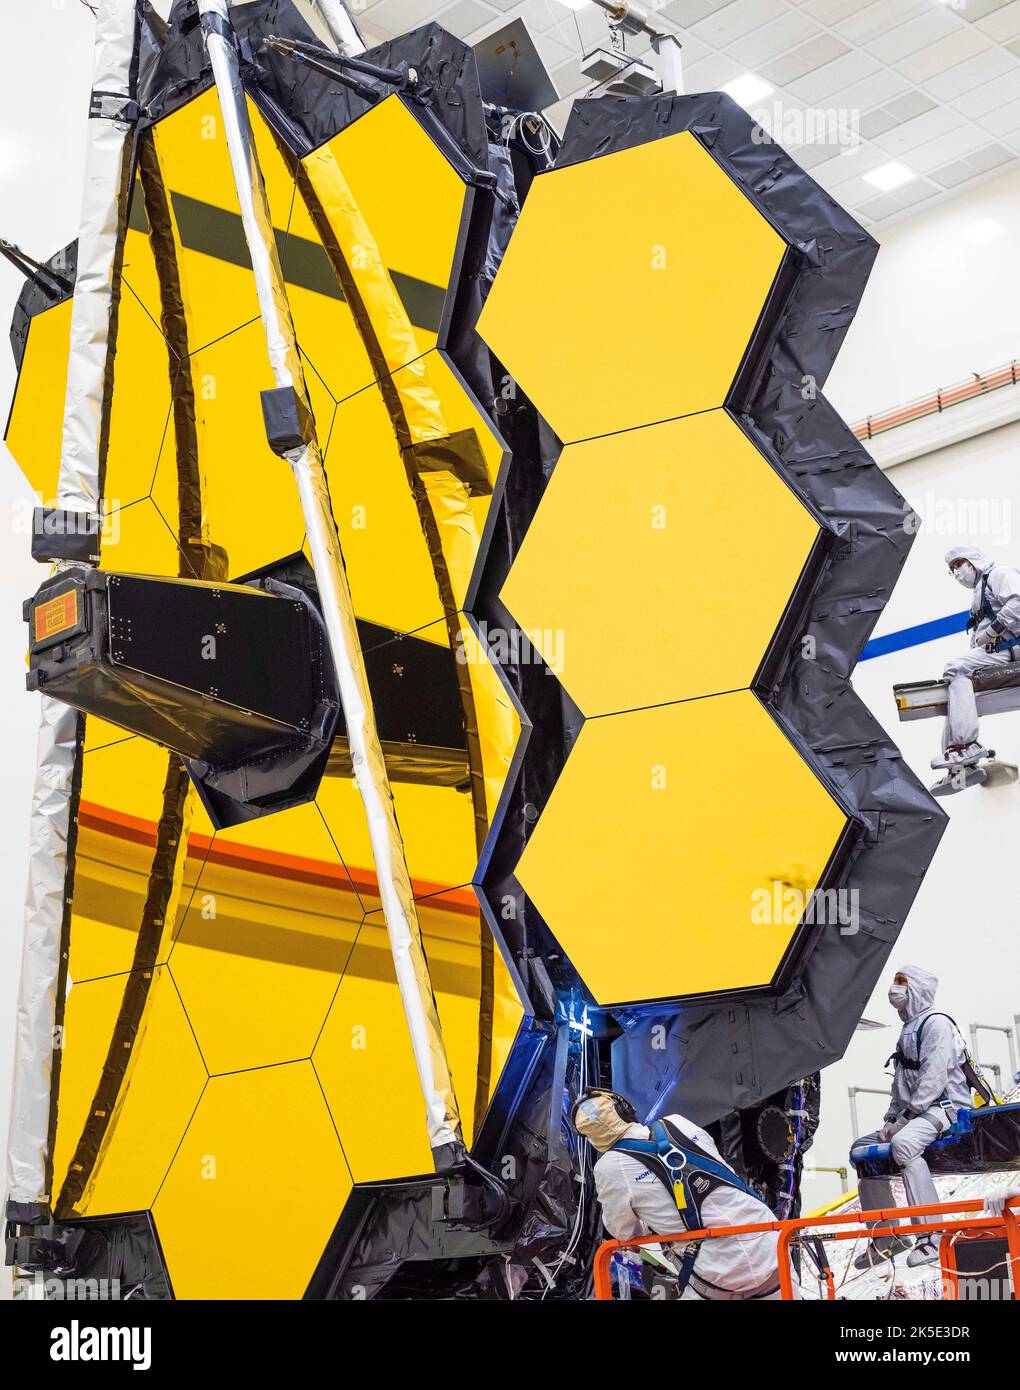 As part of final tests, the James Webb Space Telescope's 6.5 meter mirror was commanded to fully expand and lock itself into place. Making the testing conditions close to what Webb will experience in space helps to ensure the observatory is fully prepared for its science mission one million miles away from Earth.All of the final thermal blanketing and innovative shielding designed to protect its mirrors and instruments from interference were in place during testing An optimised version of a NASA image by experienced lead photographer Chris Gunn. Credit: NASA/Chris Gunn. Editorial use only. Stock Photo